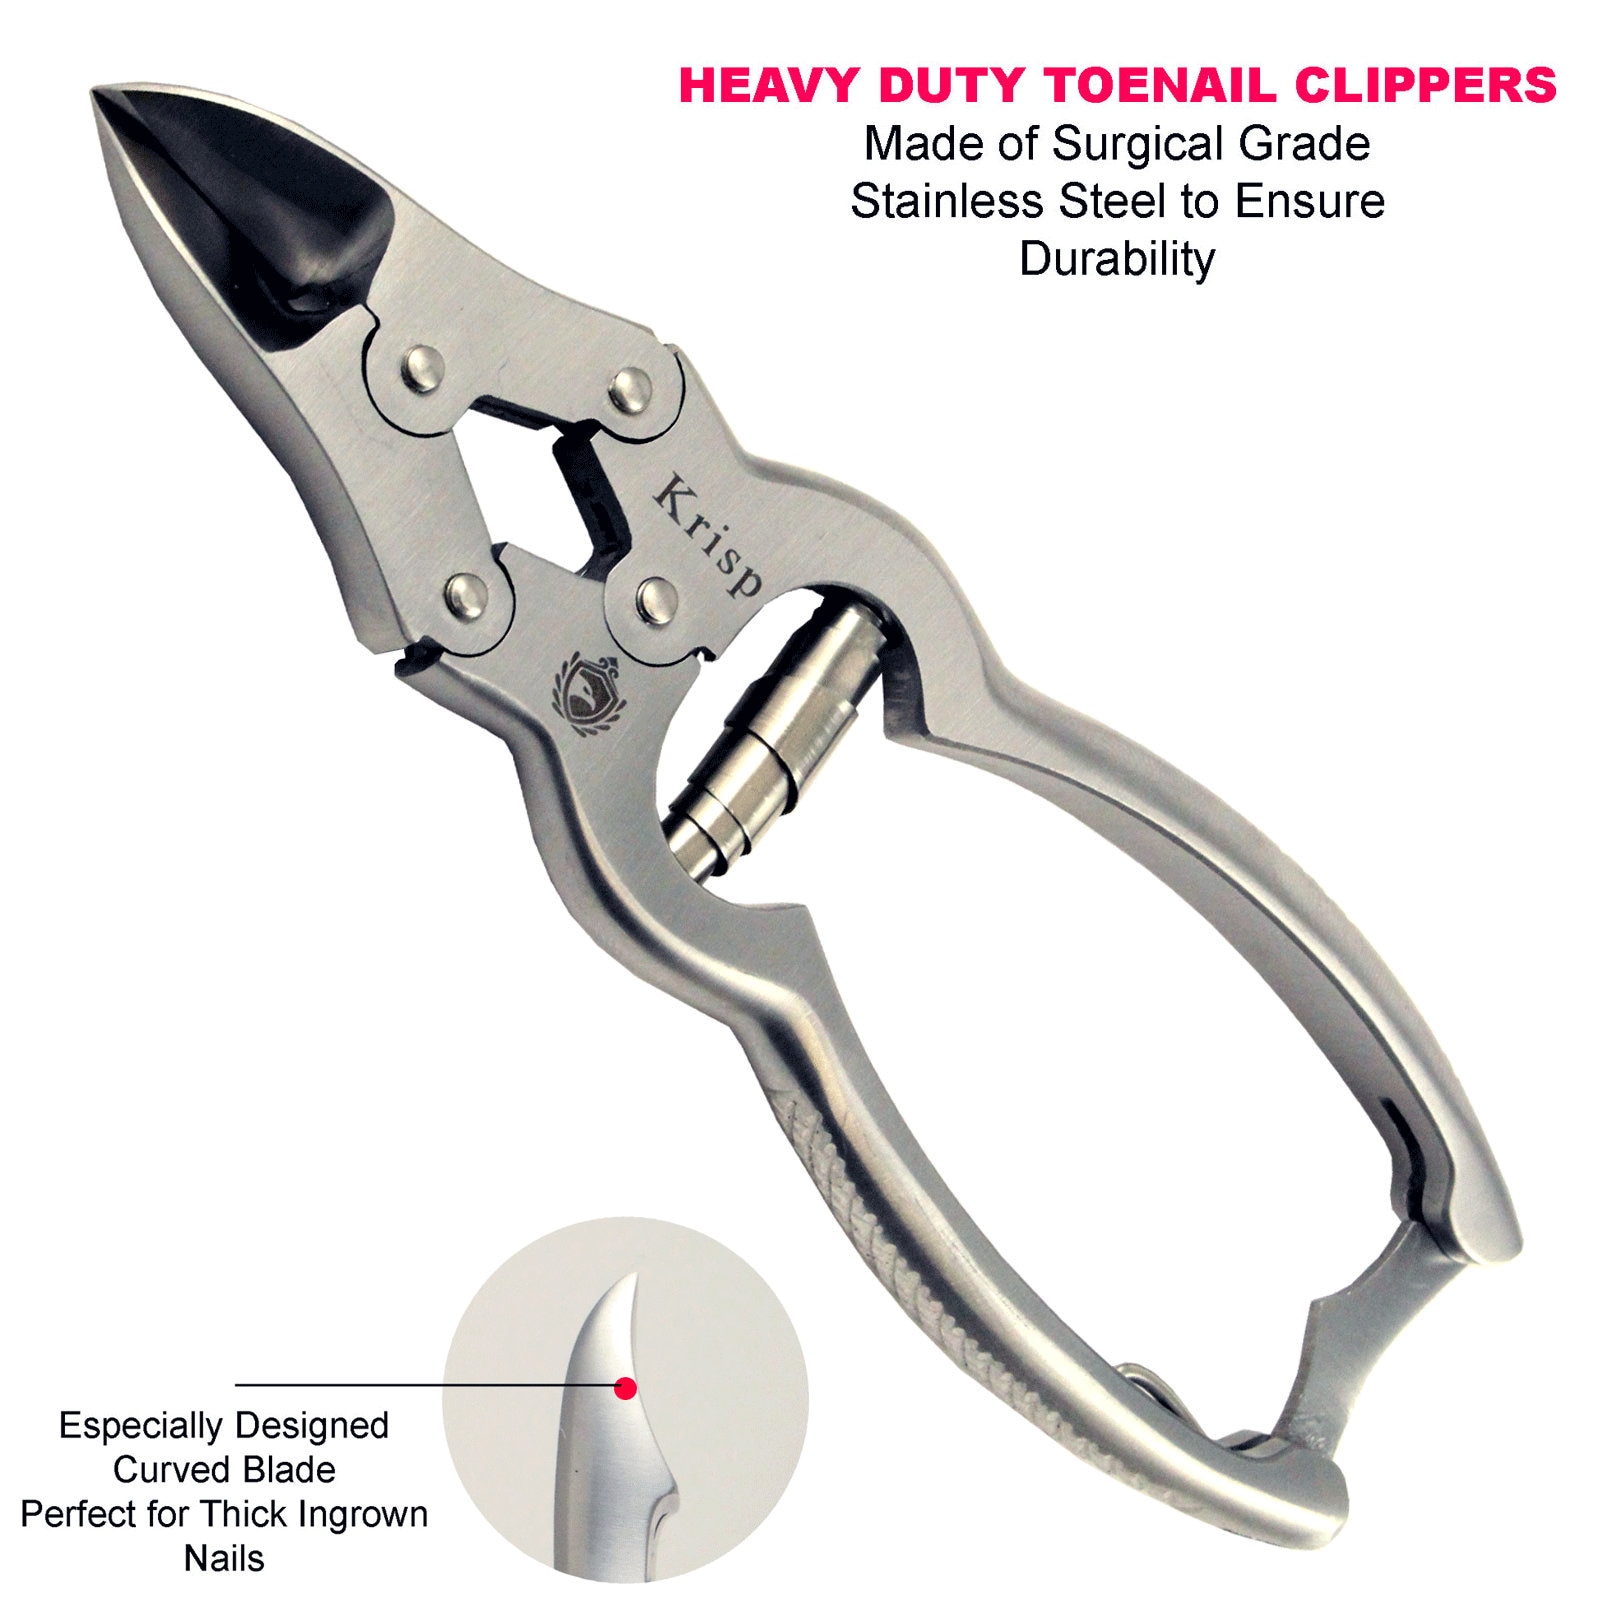 RTWAY Professional Toenail Clipper for Thick or Ingrown Nails Surgical  Grade Stainless Steel, 4 Long Nail Clippers For Men Elderly